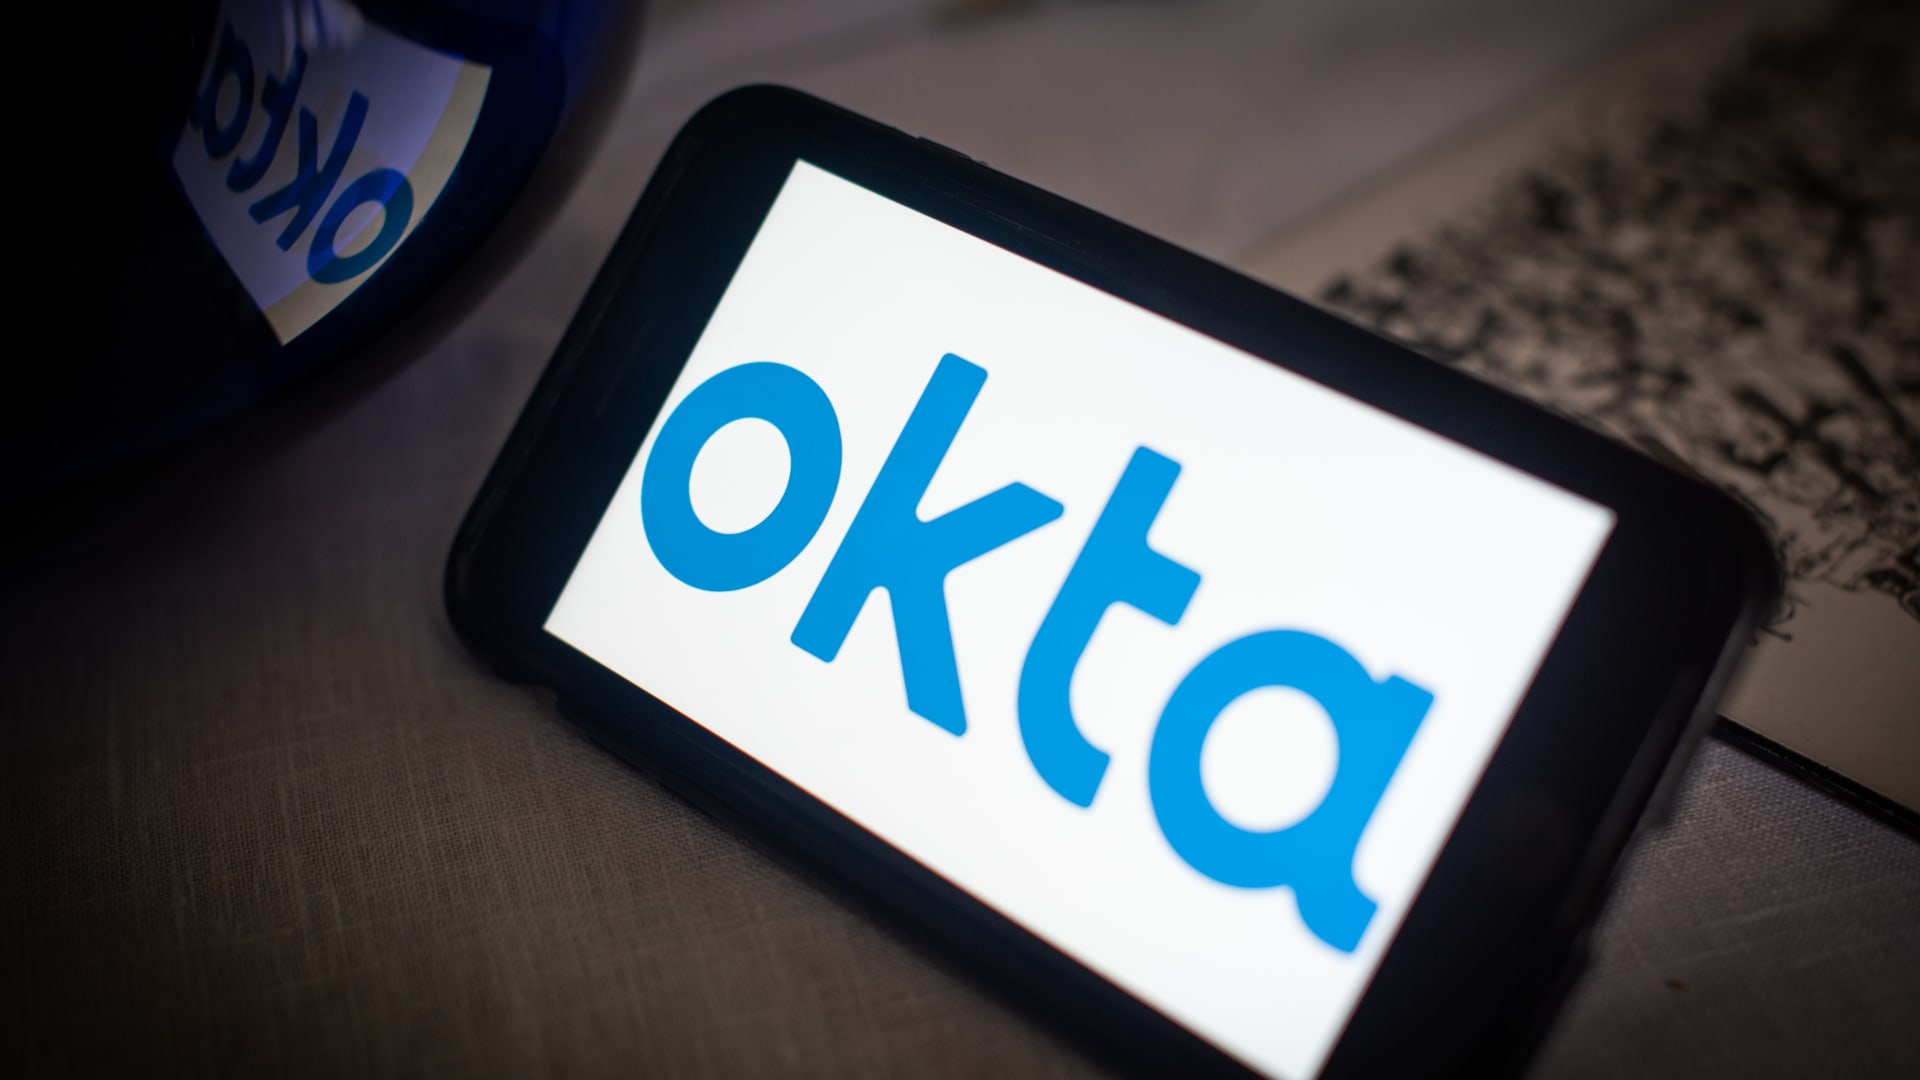 Okta shares fall 11% after company says client files were accessed by hackers via its support system